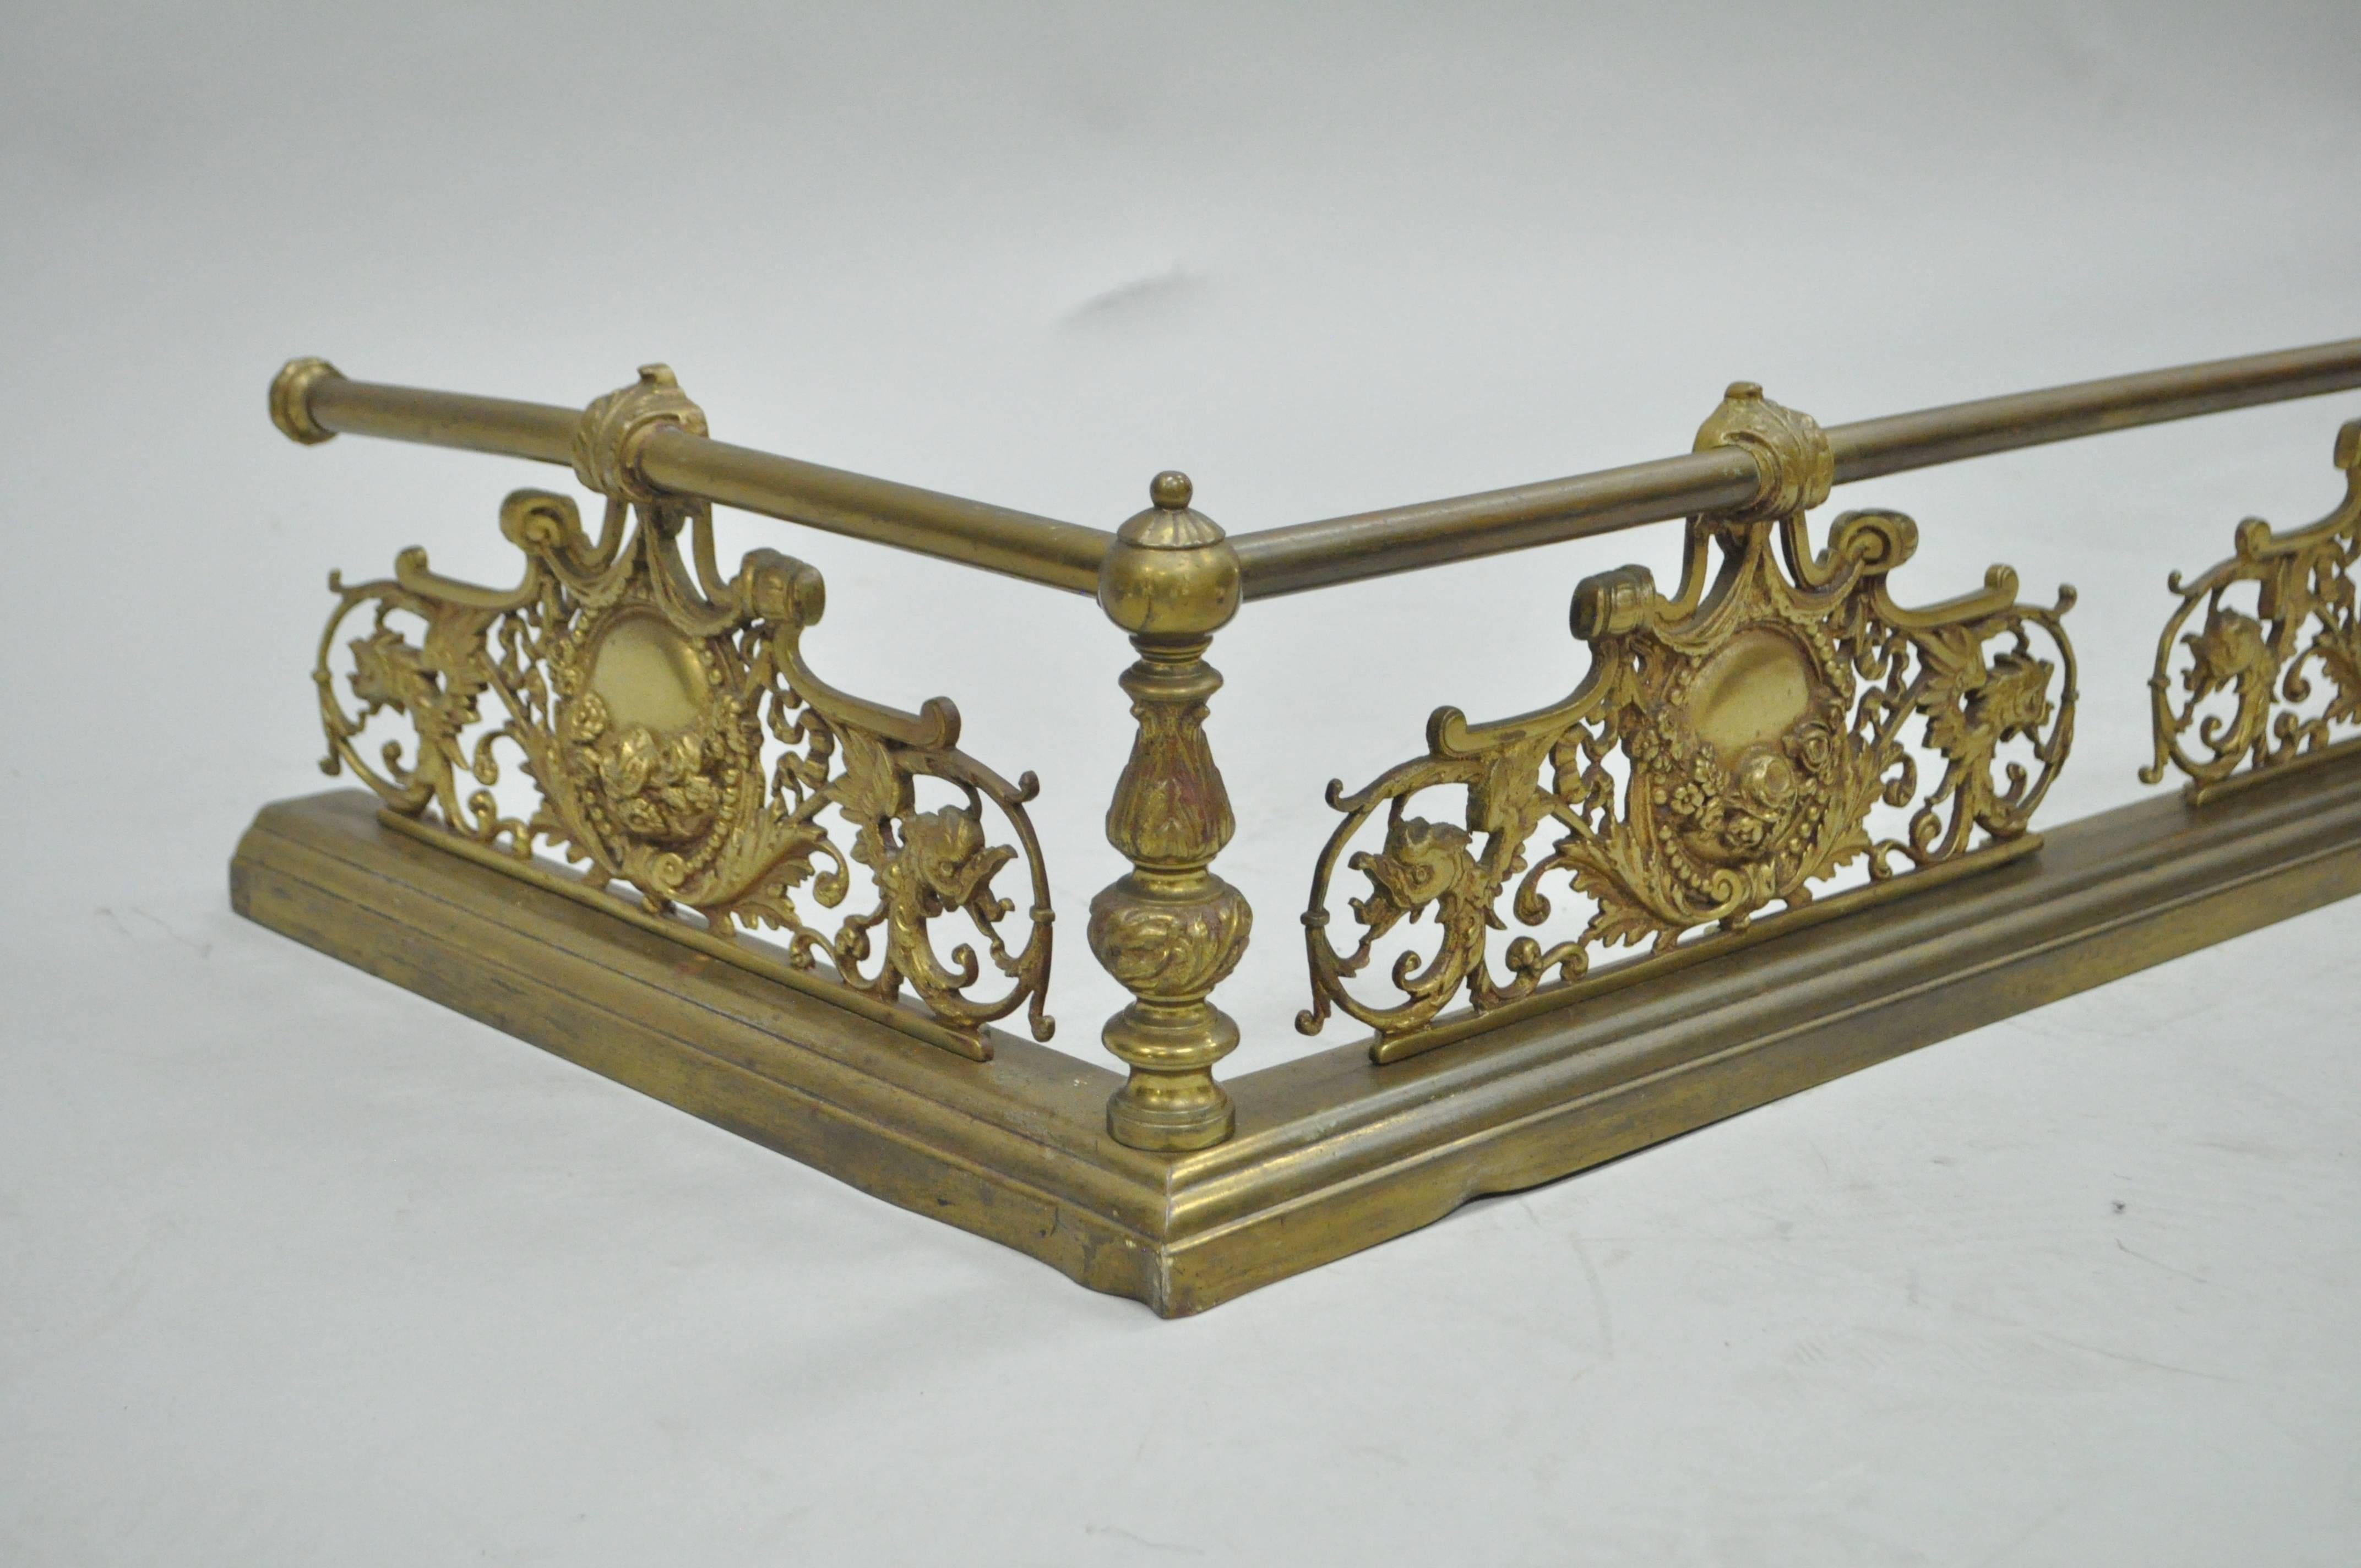 Stunning antique French Victorian gilt brass floral drape motif fireplace fender. Item features a substantial form with cast brass figural ormolu depicting acanthus leaves, drapes, and birds. The overall measurements are 7